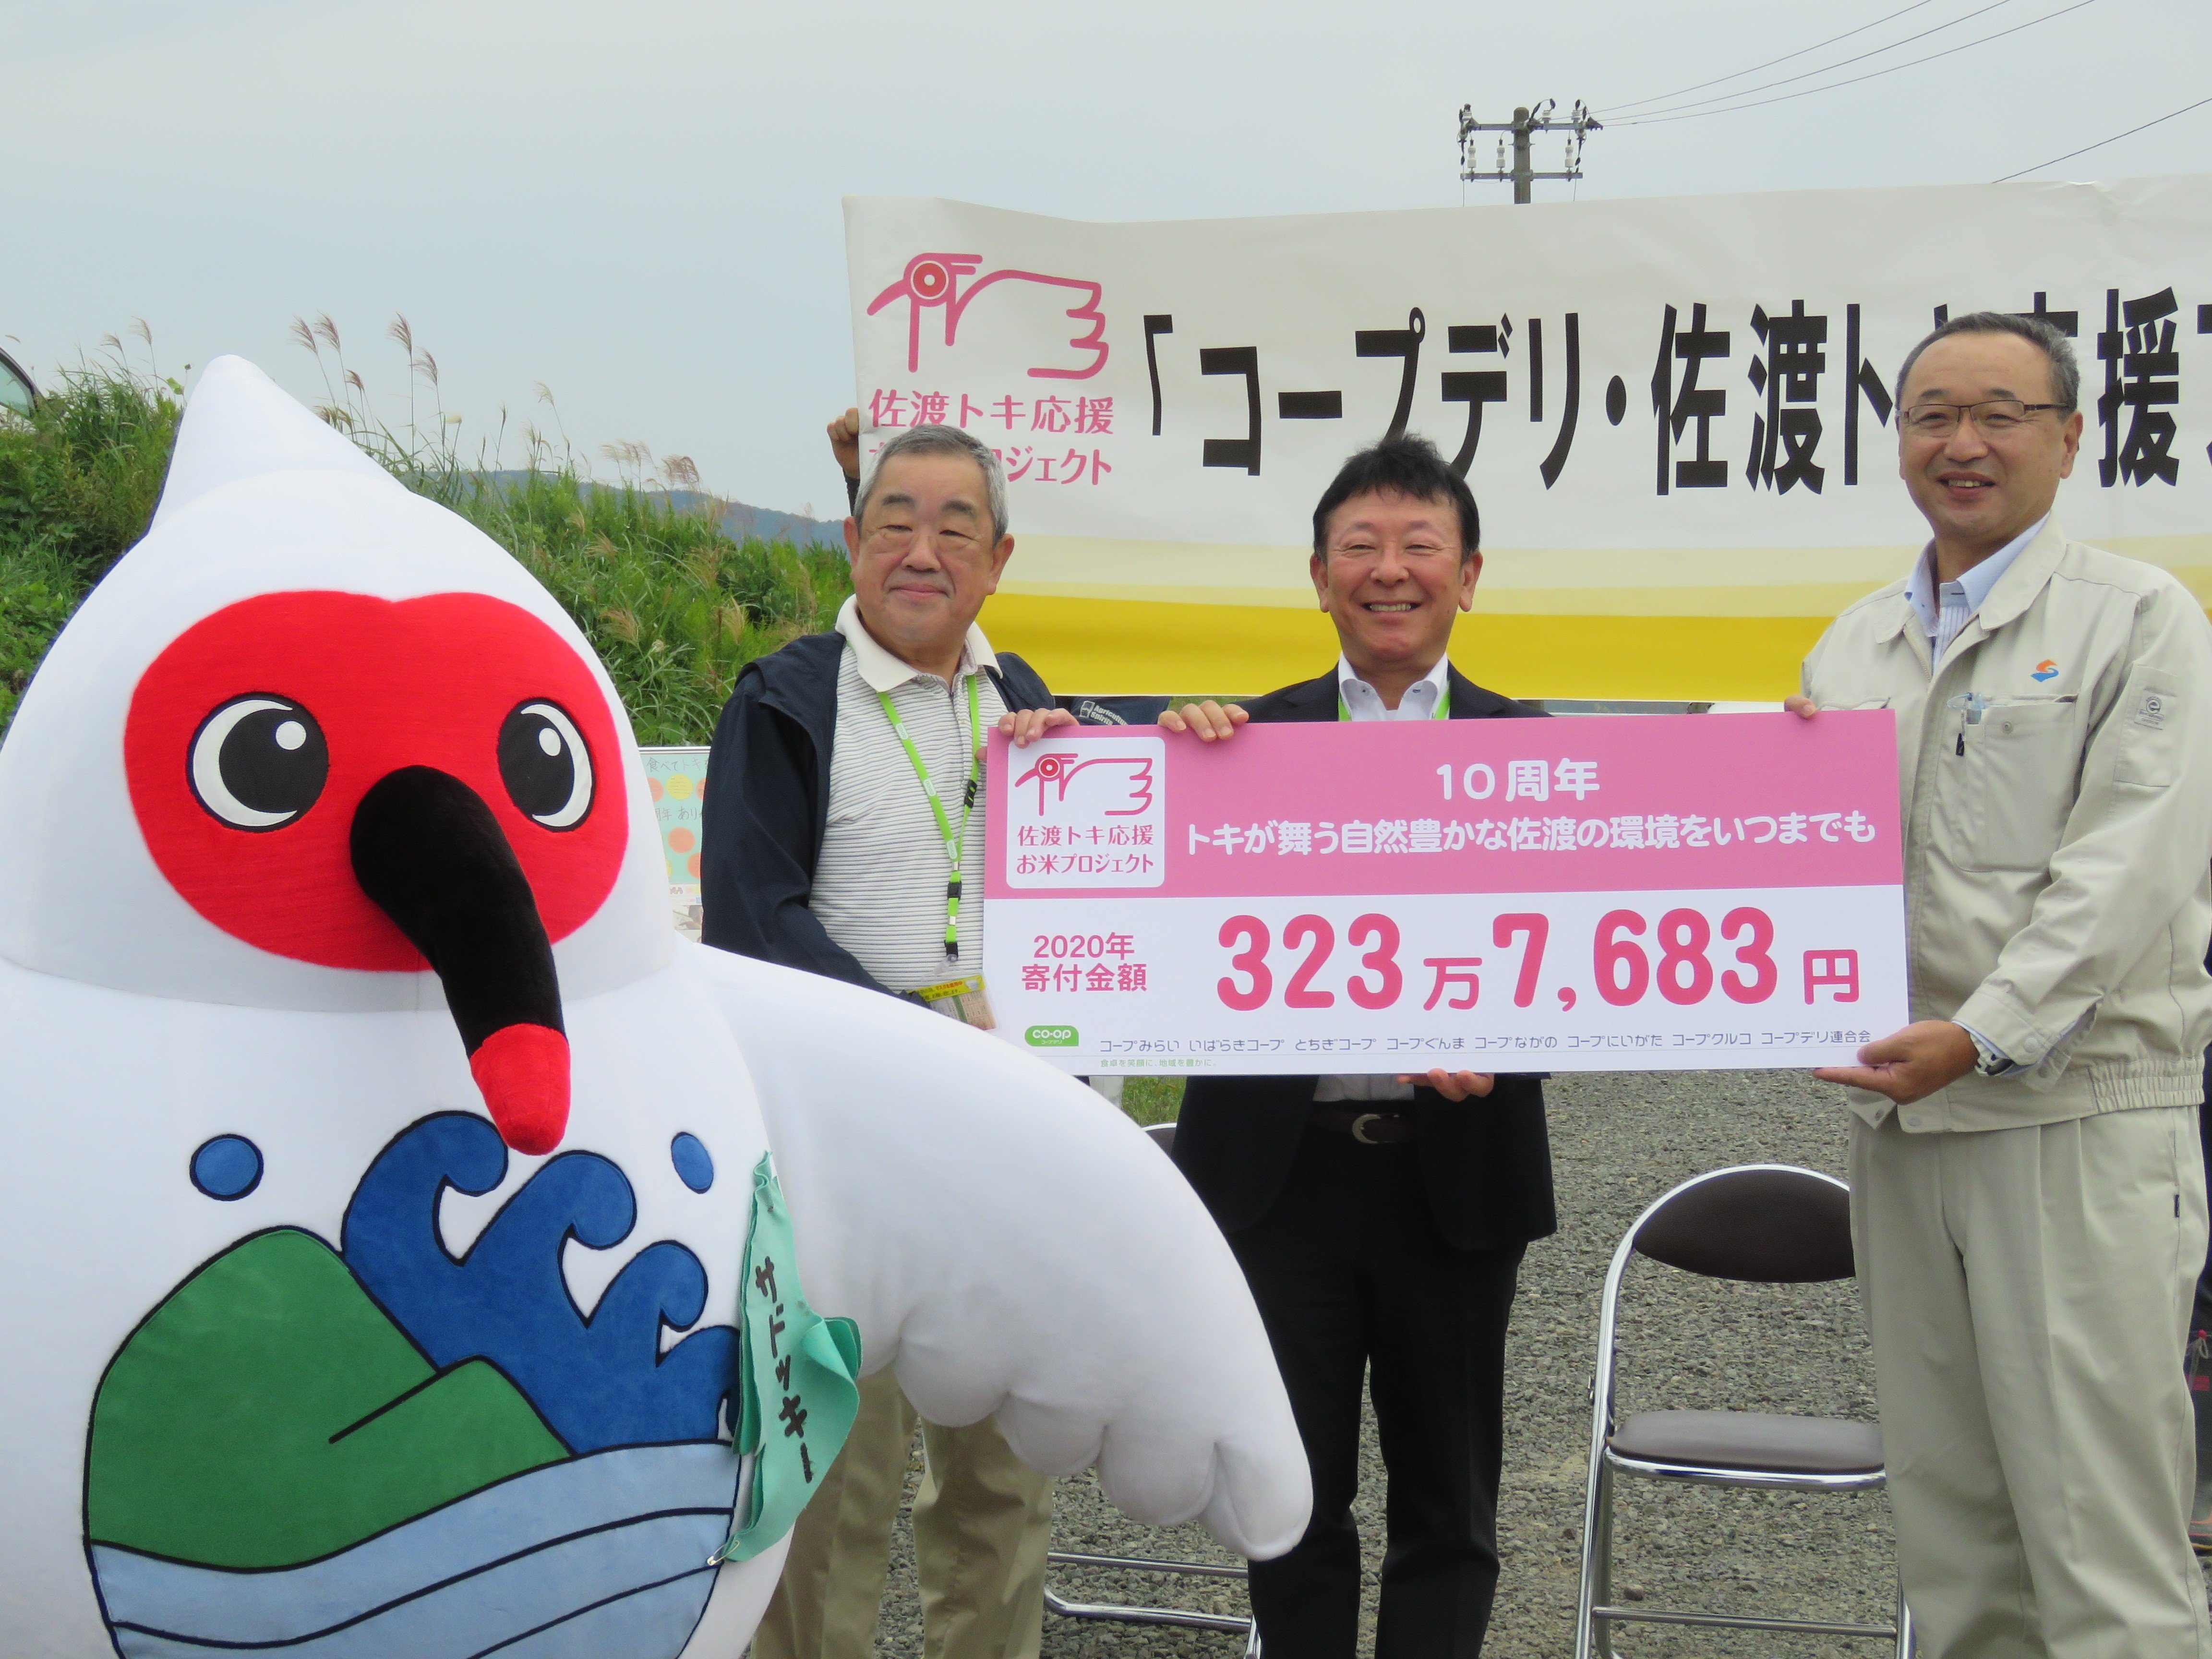 Co-op Deli supports sustainable agriculture and return of Crested Ibis on Sado Island